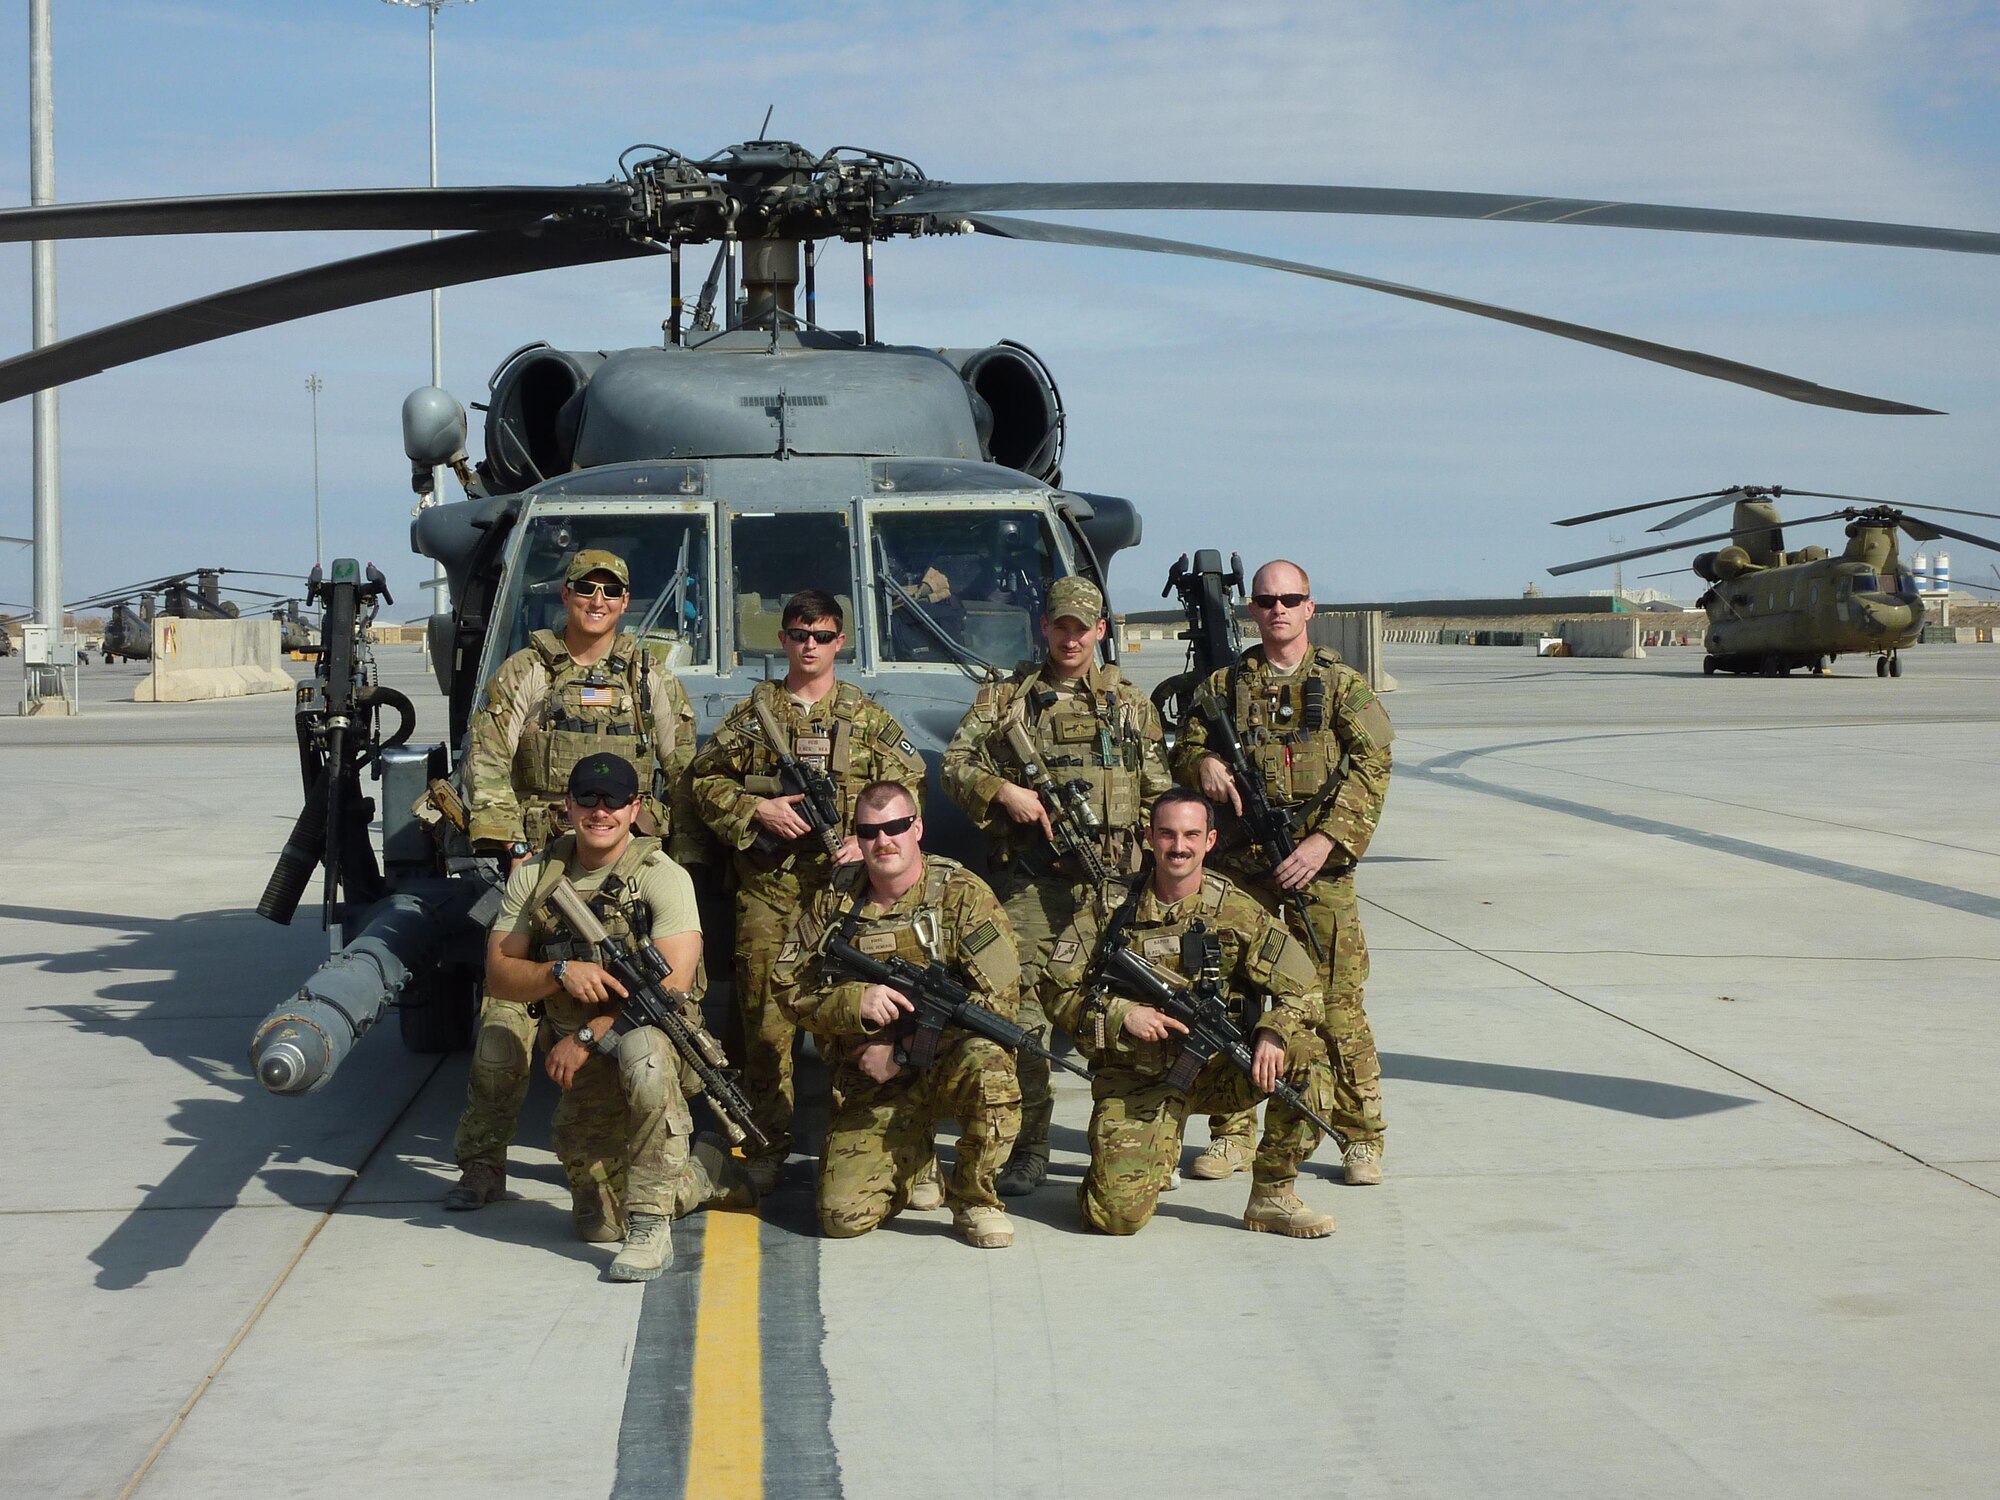 Capt. Charles C. Napier, bottom right, poses with his team members while deployed to Afghanistan. Napier earned the Distinguished Flying Cross for his heroic actions in Afghanistan in December 2012. 